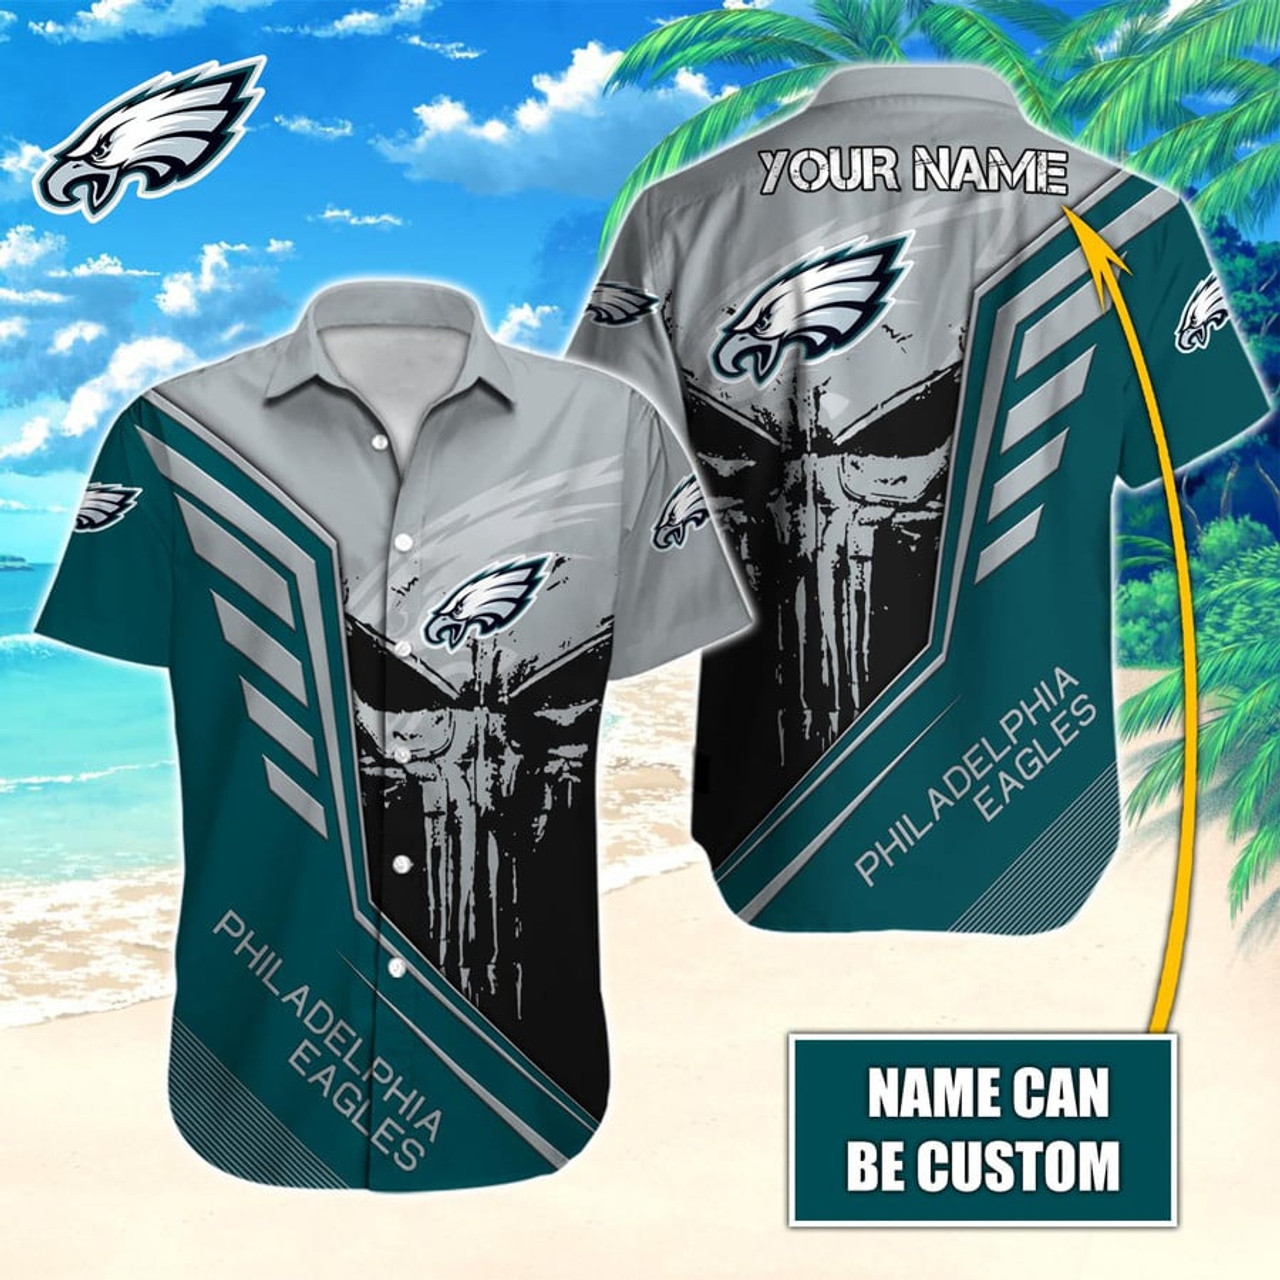 **(NFL.PHILADELPHIA-EAGLES TEAM BUTTON FRONT DRESS SHIRTS/CUSTOM-3D-EAGLES-OFFICIAL-LOGOS & OFFICIAL-CLASSIC-EAGLES-TEAM-COLORS/ADD-YOUR-OWN-PERSONALIZED-NAME-OR-SPECIAL-CUSTOM-TEXT-BACK-DESIGN/PREMIUM-N.F.L.EAGLES-GAME-DAY-TEAM-DRESS-SHIRTS)**